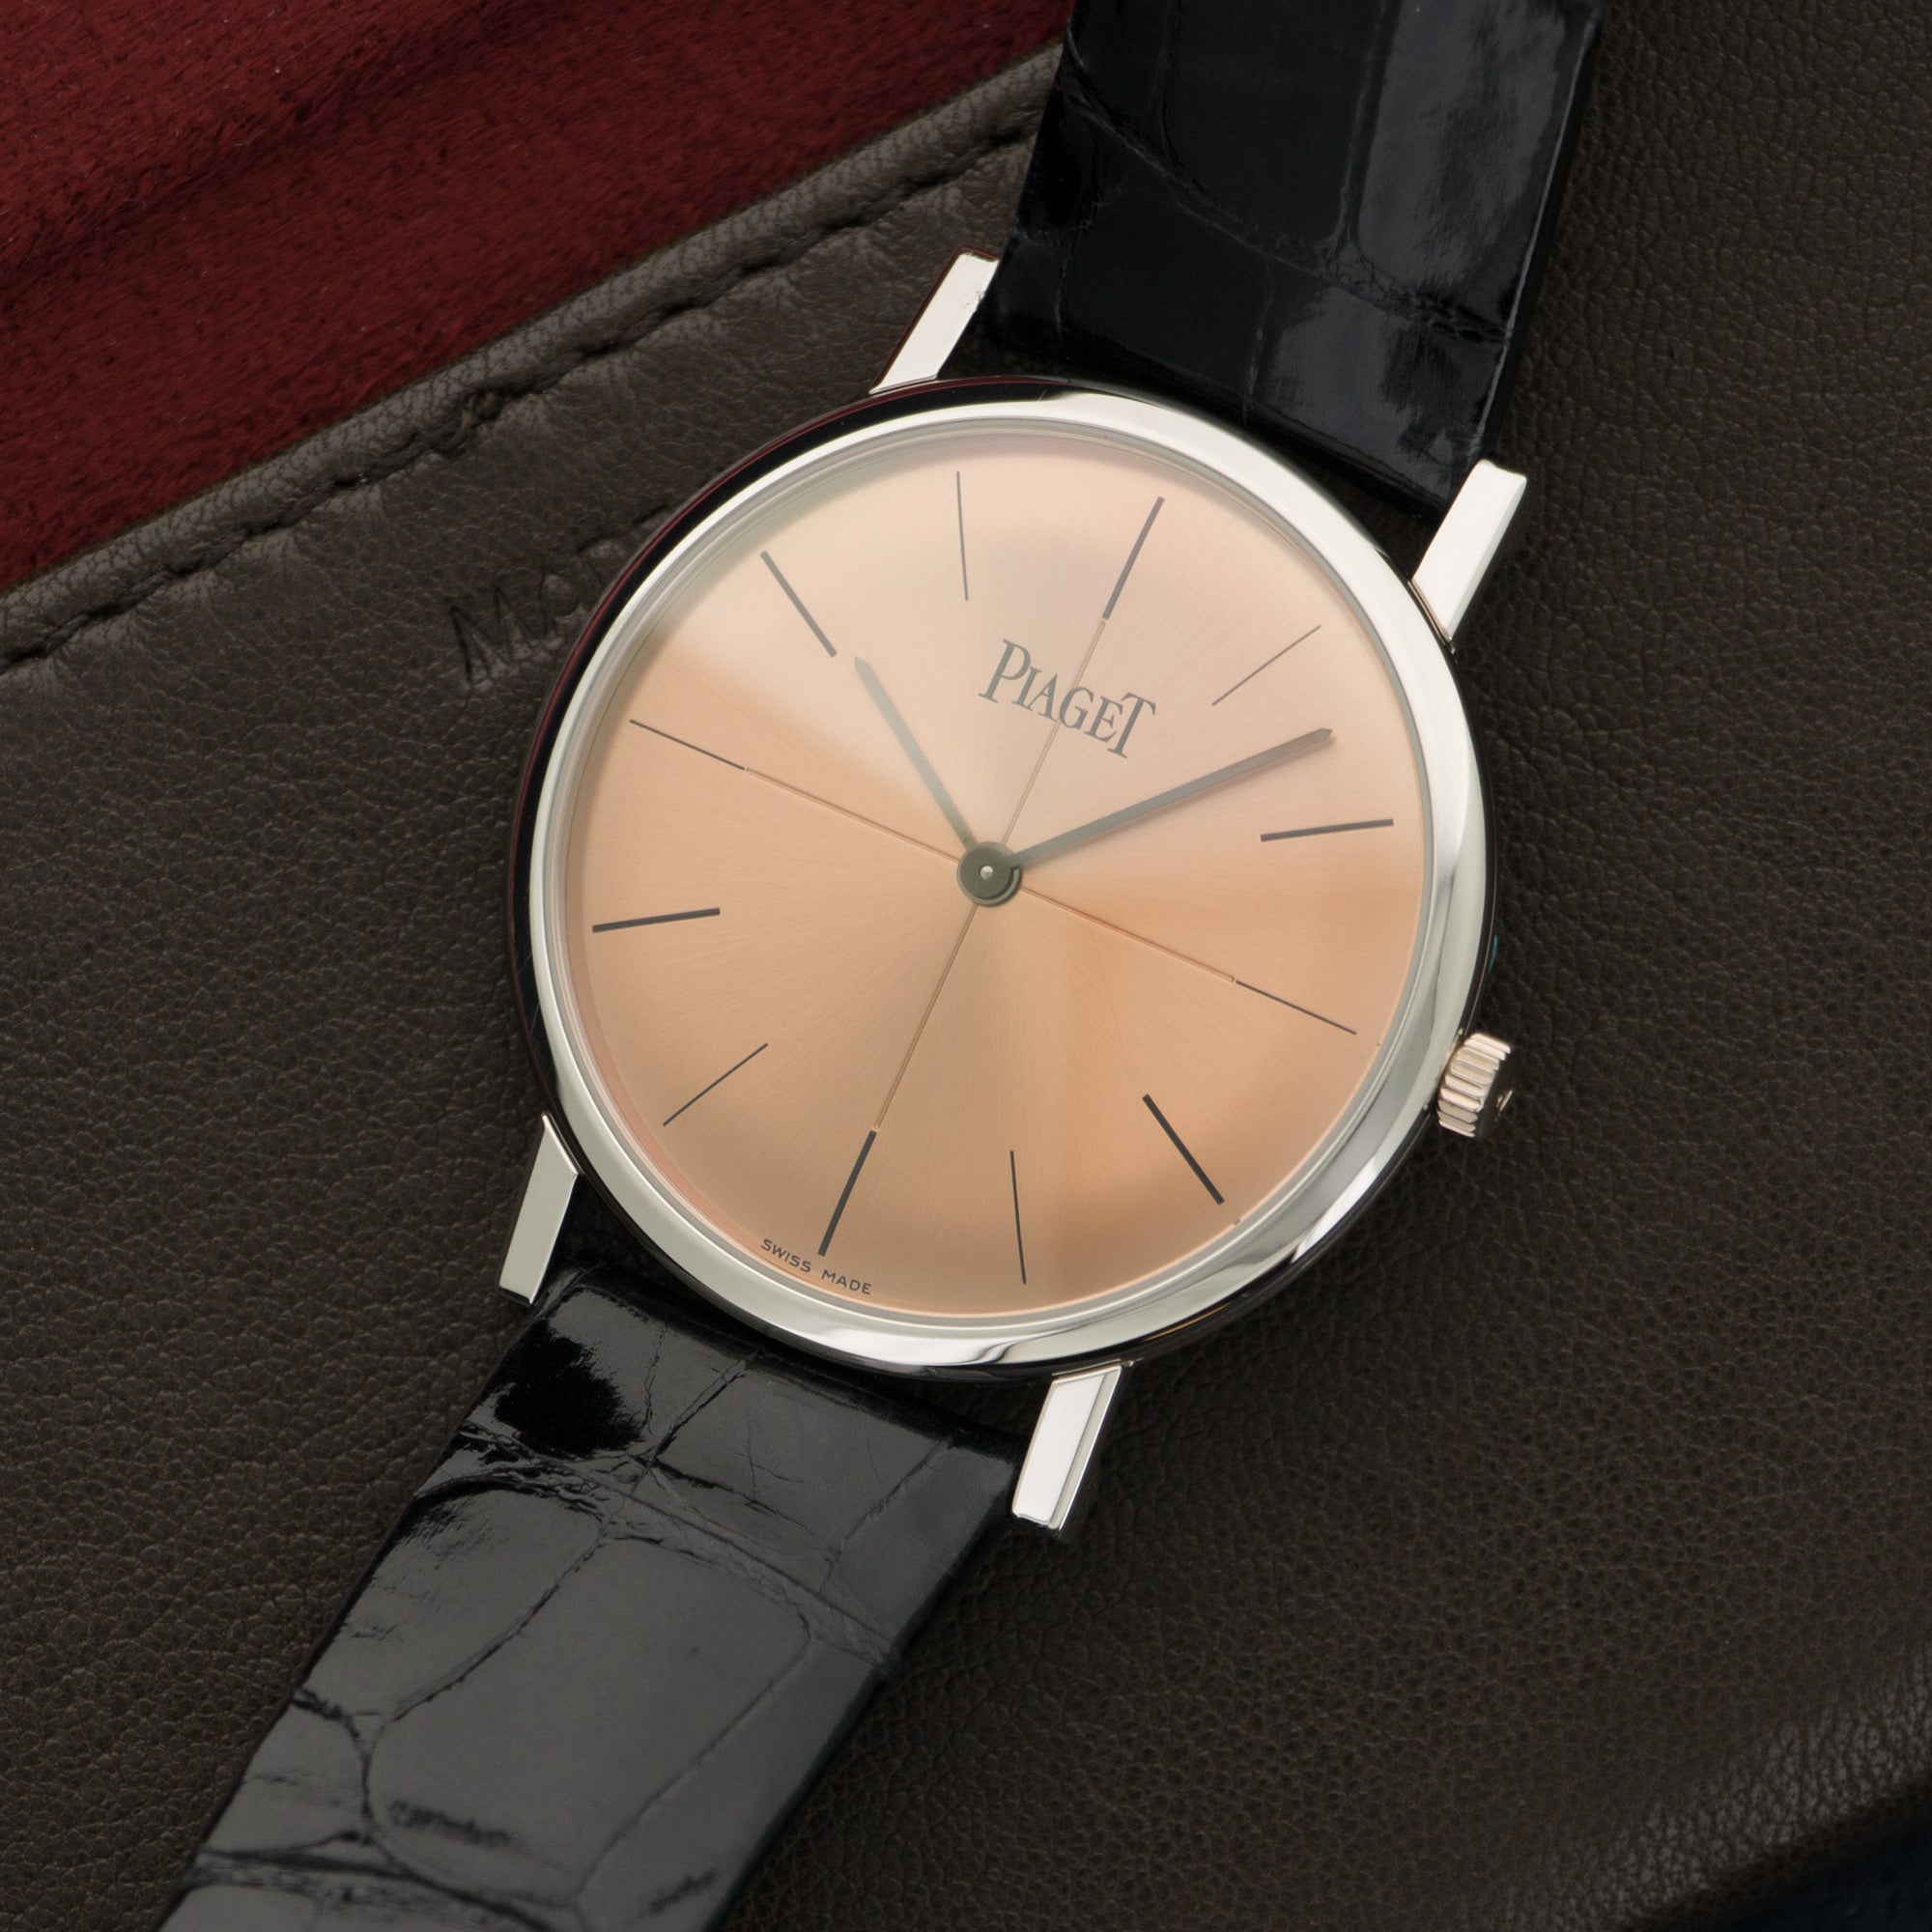 Piaget - Piaget Platinum Altiplano Ultra Thin Watch Ref. G0A27009 - The Keystone Watches